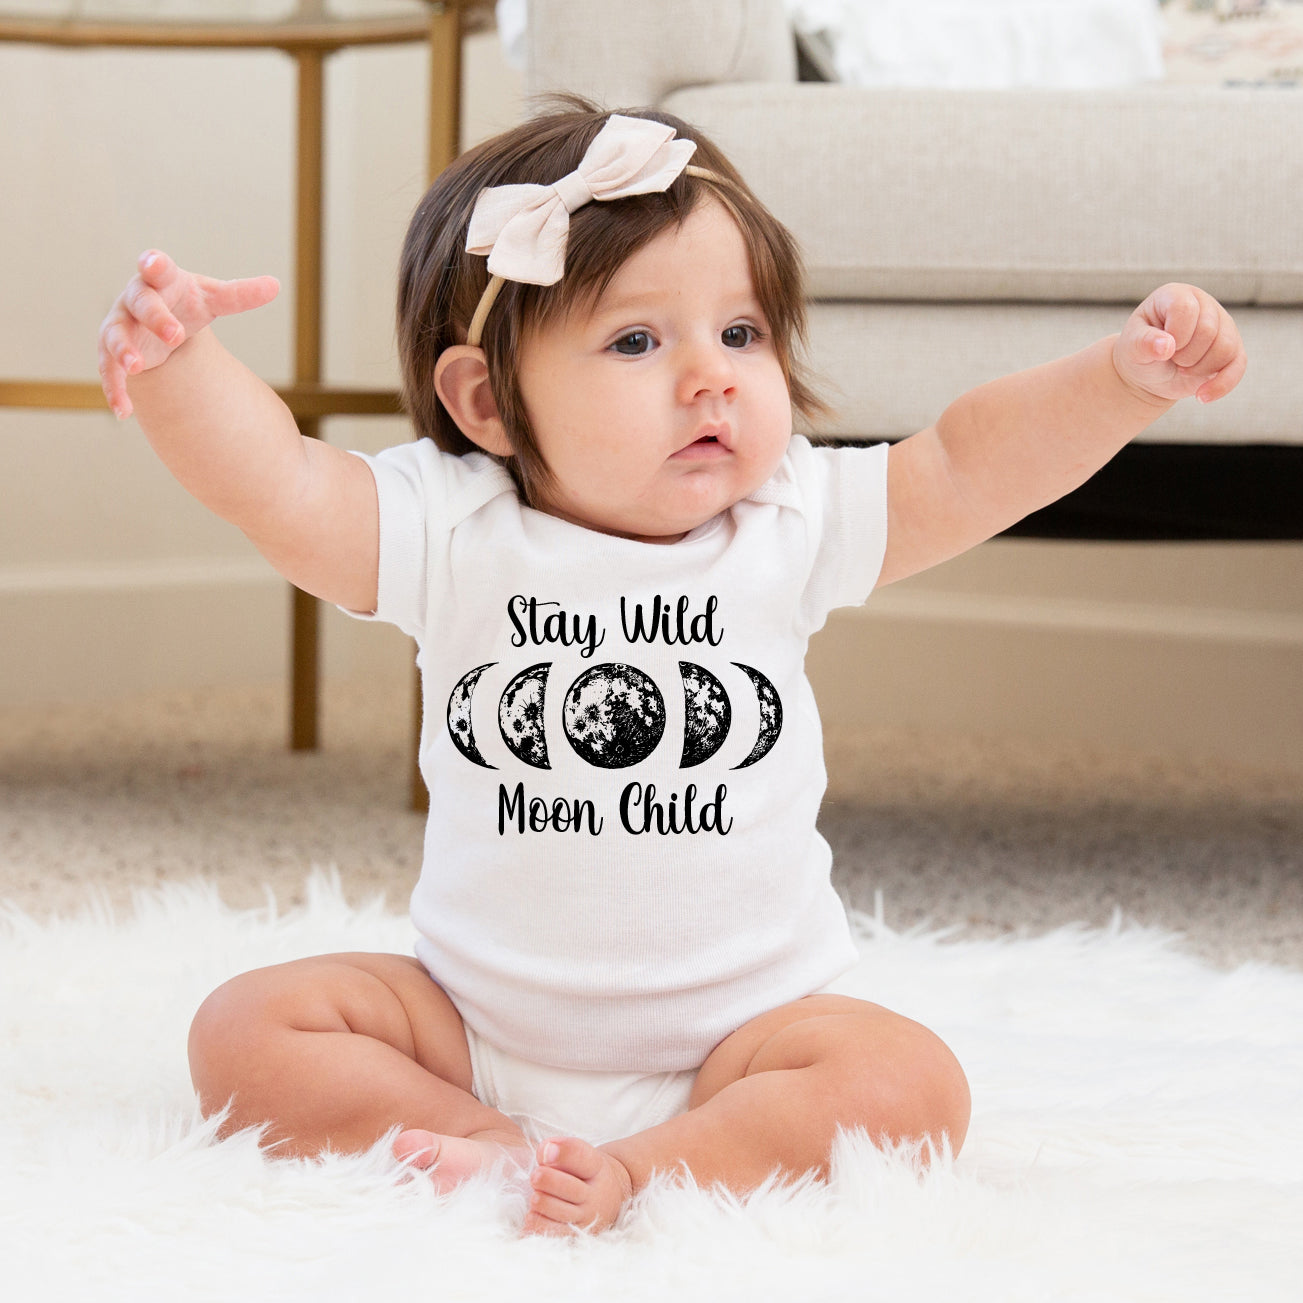 Stay Wild Moon Child Gerber Onesie® decorated wtih Pipsy artwork. Hand printed and pressed in our Nashville Studio. Long sleeved